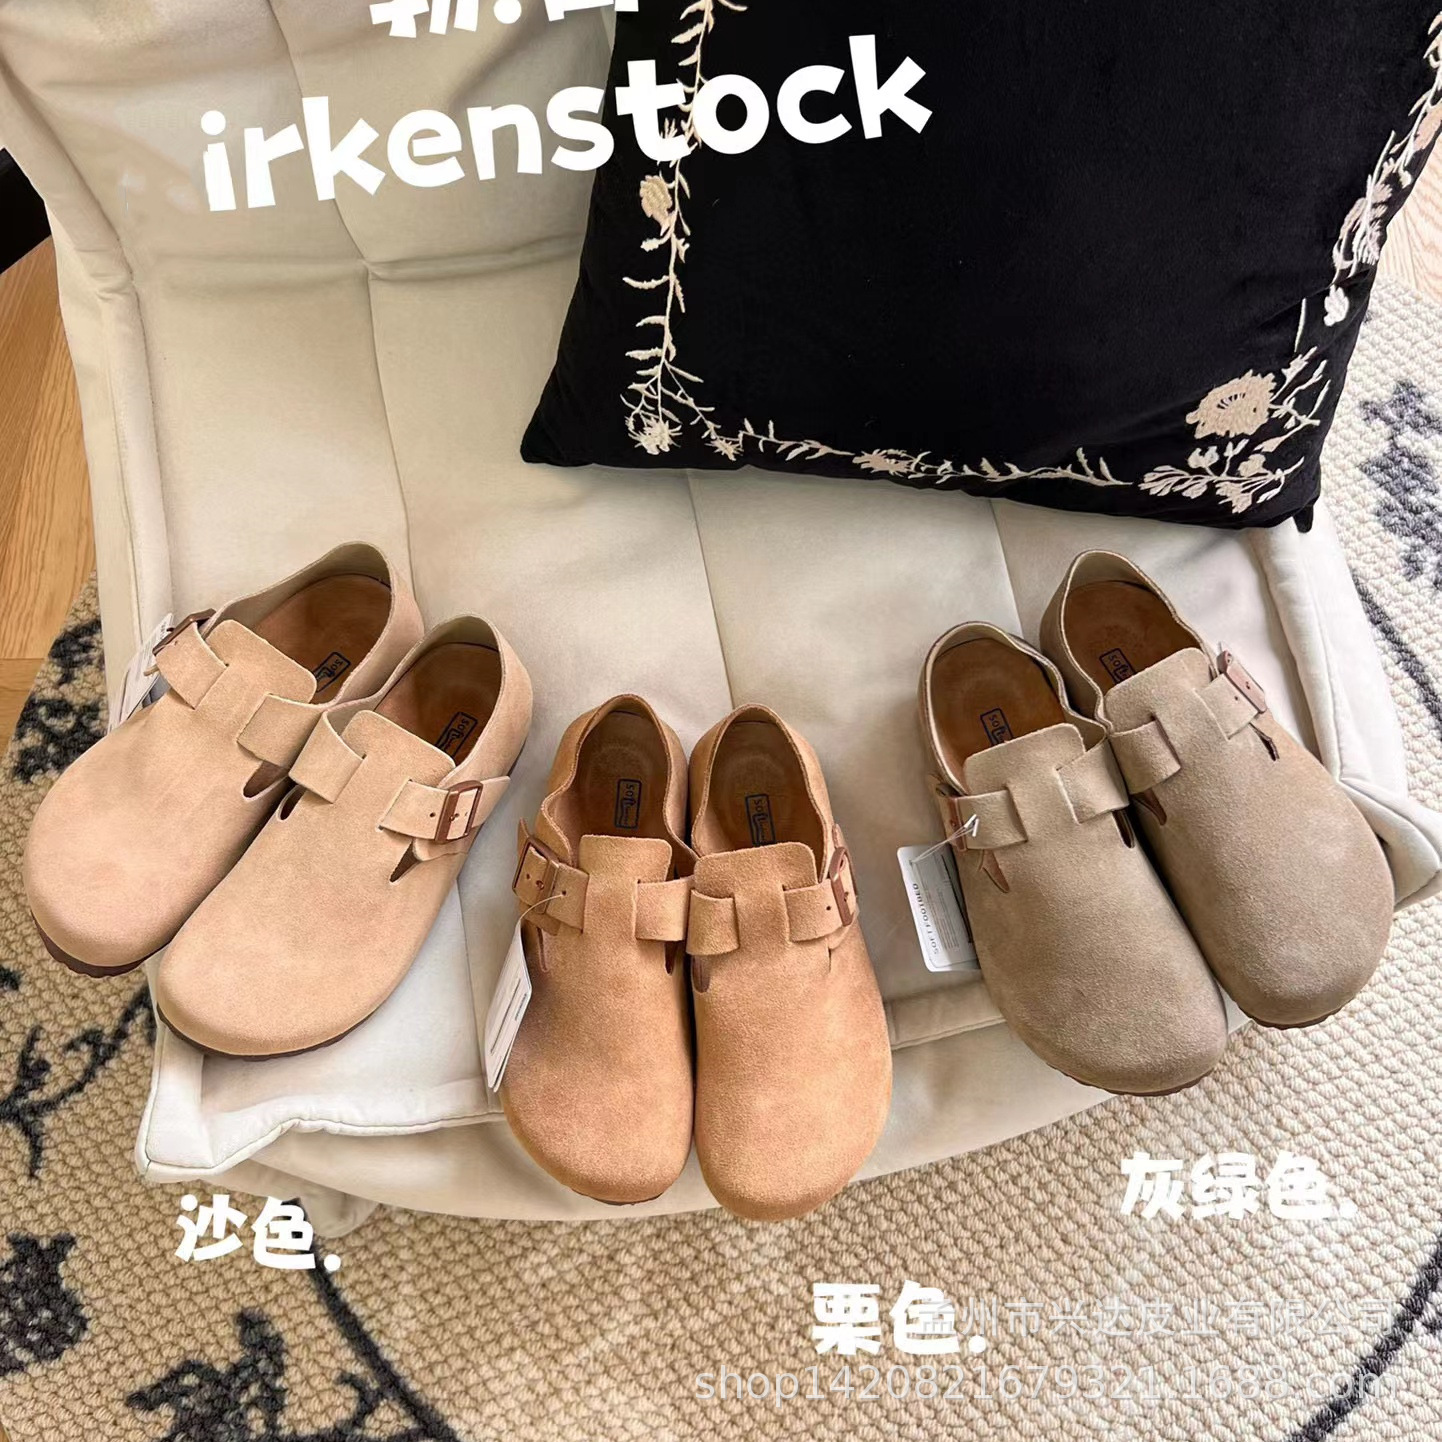 Birkenstock All-Inclusive Thick Bottom Half Slippers for Women Spring Retro Slip-on Closed-Toe Slippers Genuine Leather Pumps Boken Slippers